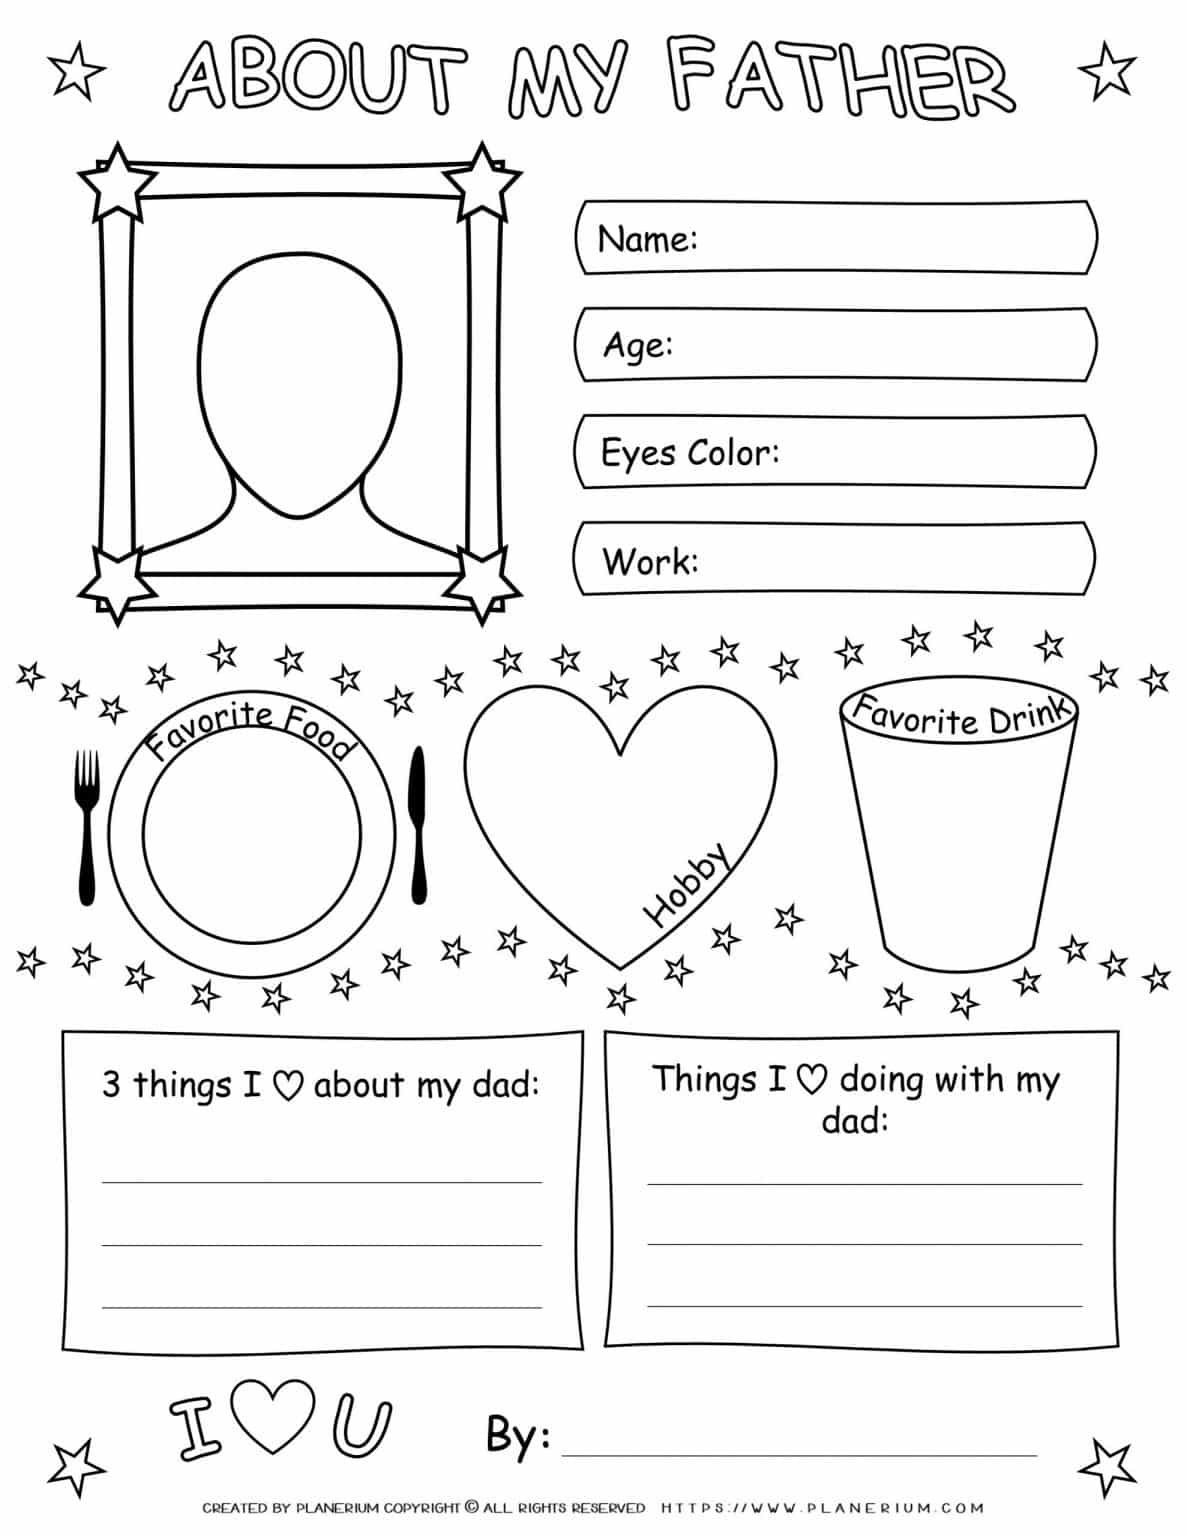 father-s-day-worksheet-about-my-father-planerium